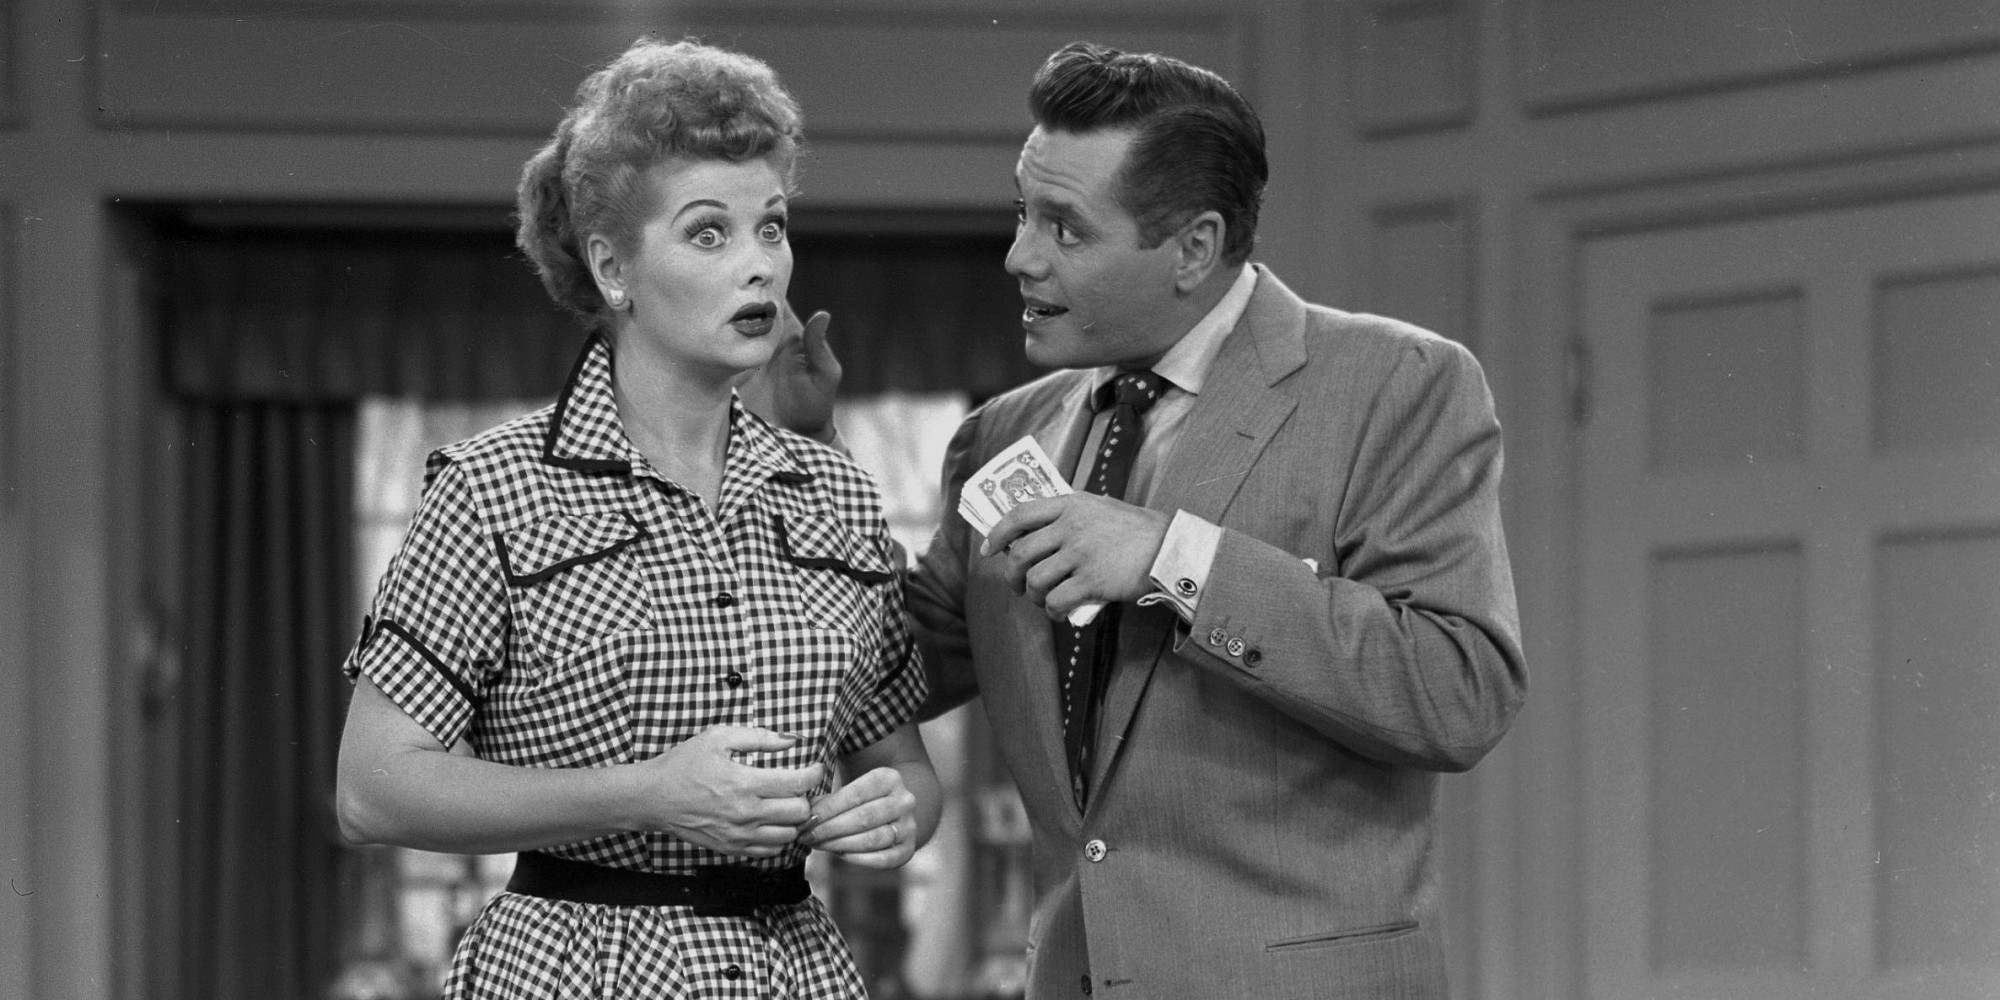 How Well Do You Know “I Love Lucy”? Lucille Ball And Desi Arnaz In 'I Love Lucy'